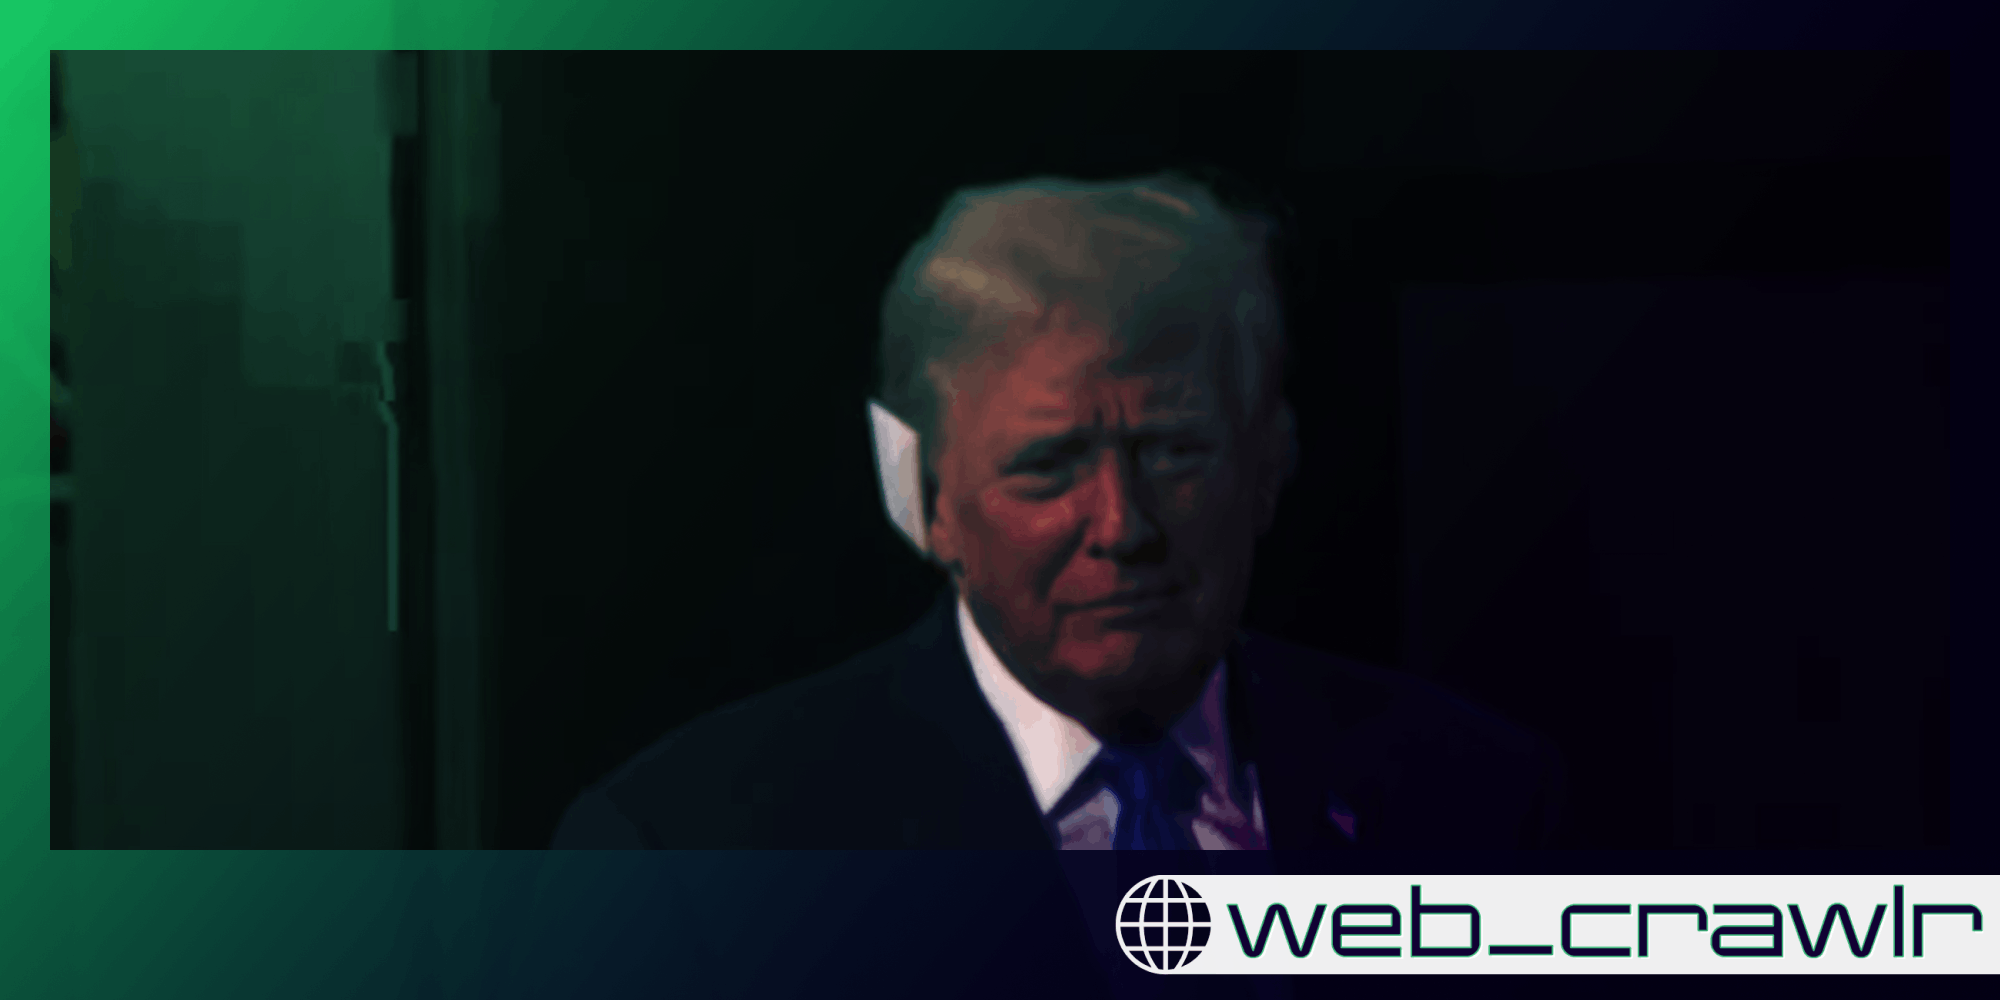 Donald Trump with a bandage over his ear. The Daily Dot newsletter web_crawlr logo is in the bottom right corner.